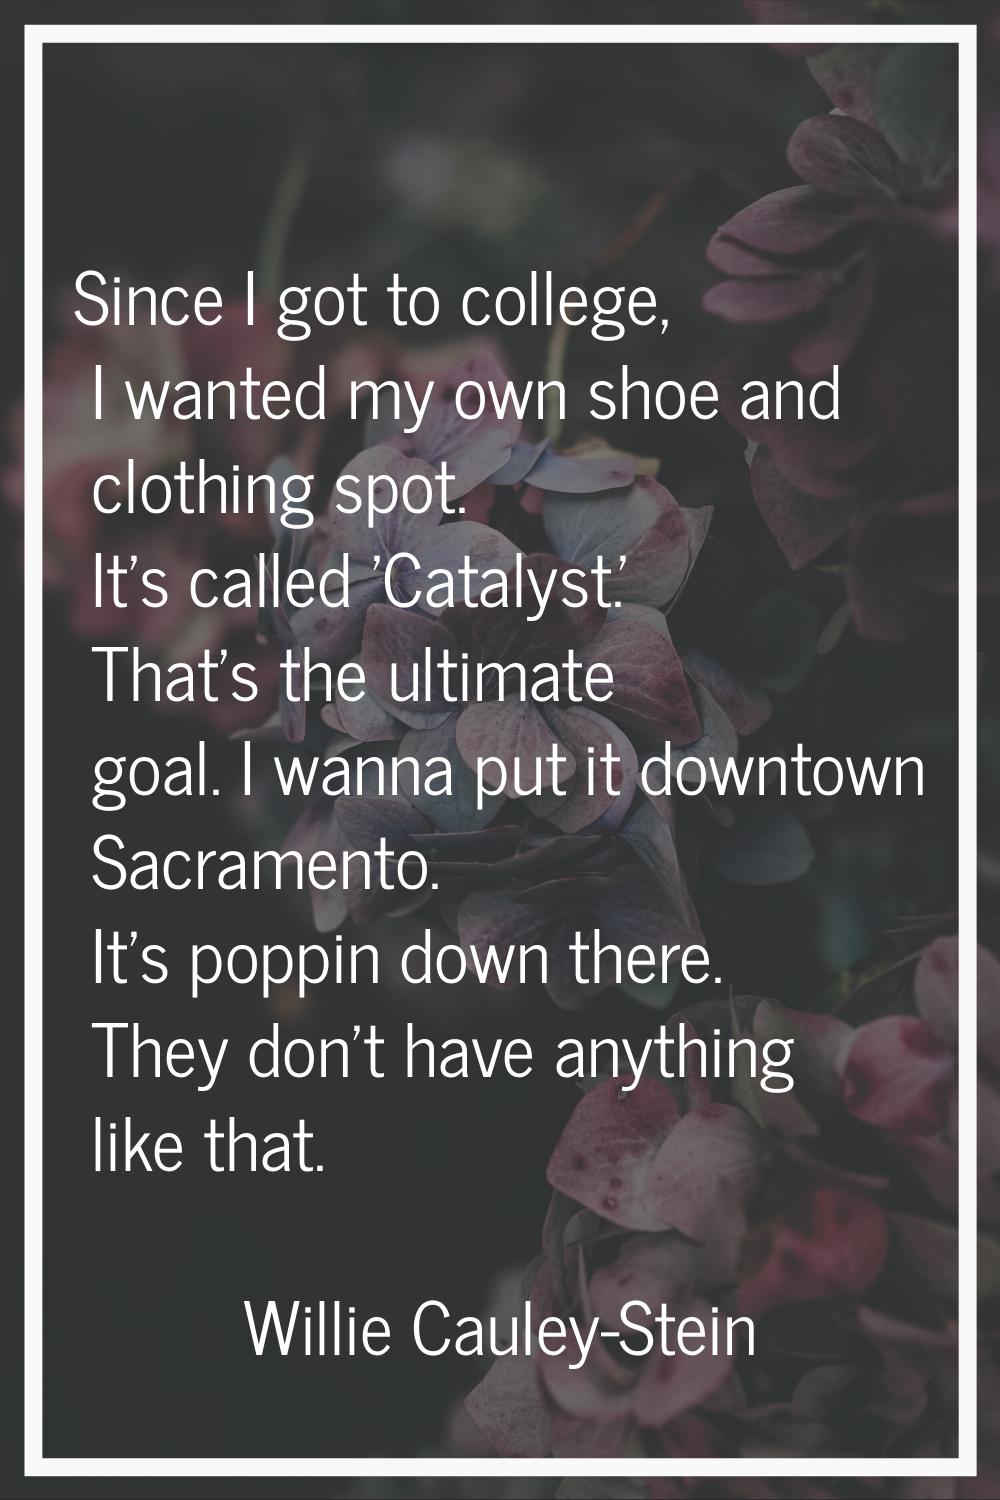 Since I got to college, I wanted my own shoe and clothing spot. It's called 'Catalyst.' That's the 